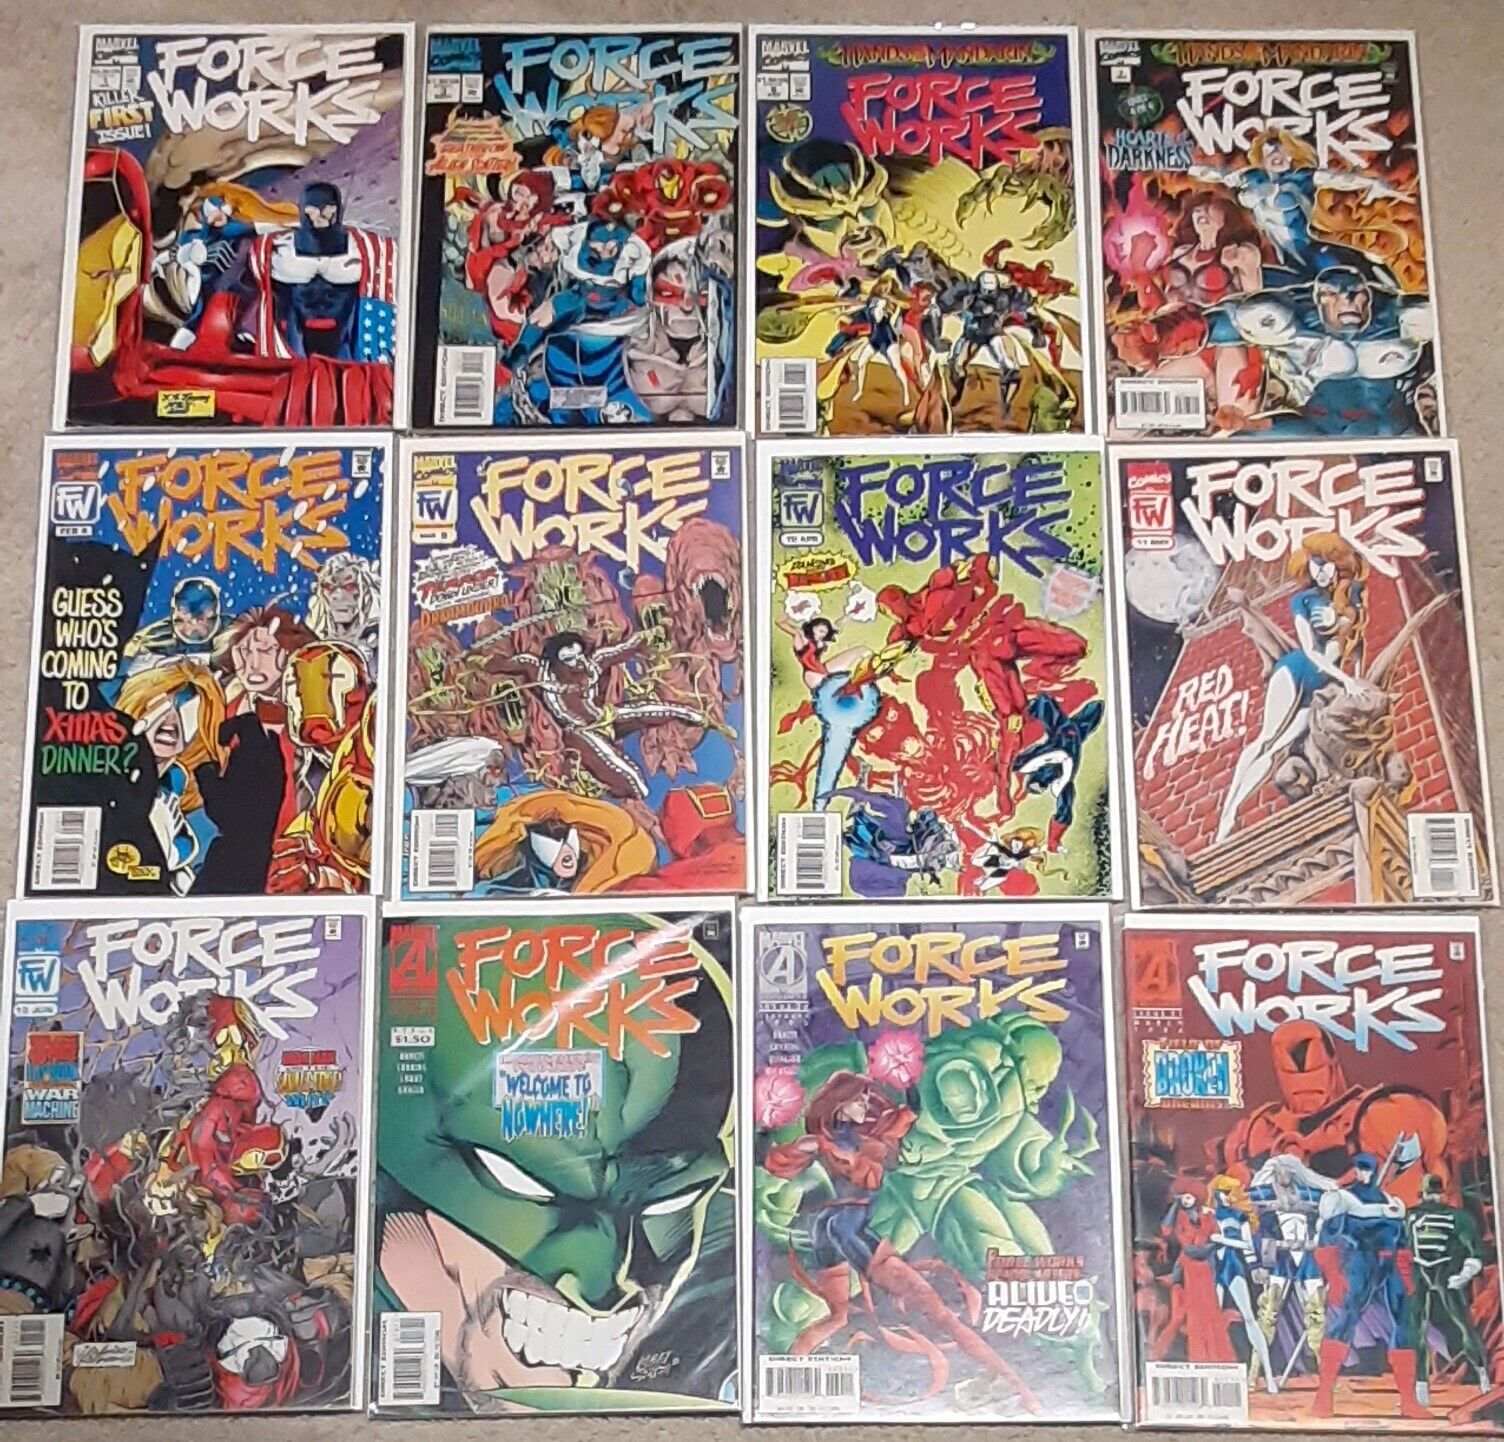 Force Works #1-21 (Lot of 12) Vol 1 1994 Marvel VF SEE PICS 1st Force Works